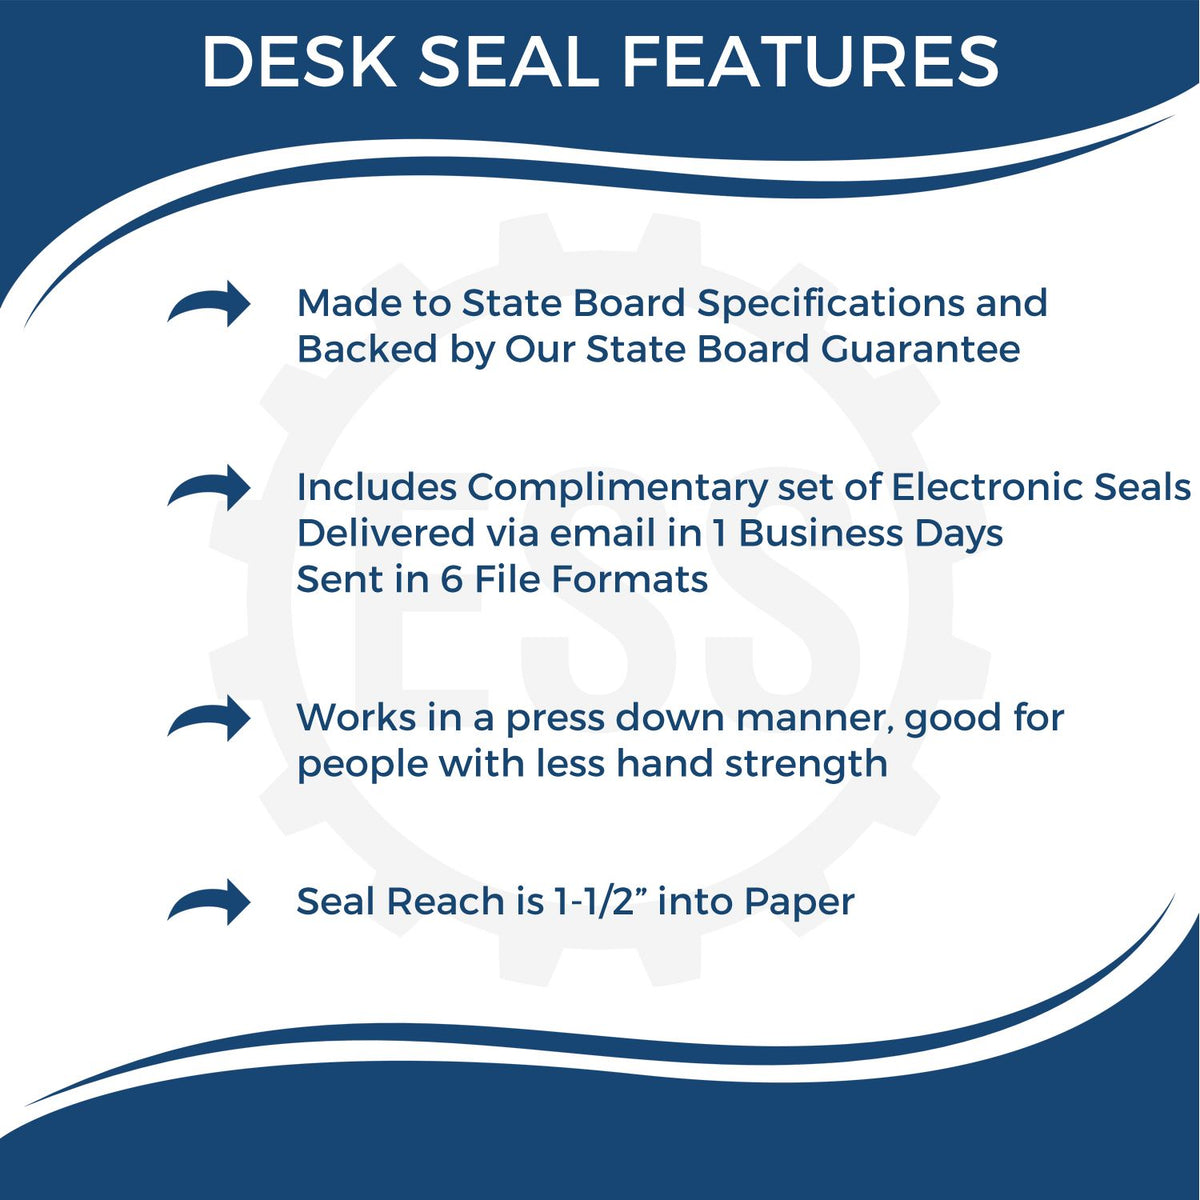 A picture of an infographic highlighting the selling points for the Florida Geologist Desk Seal